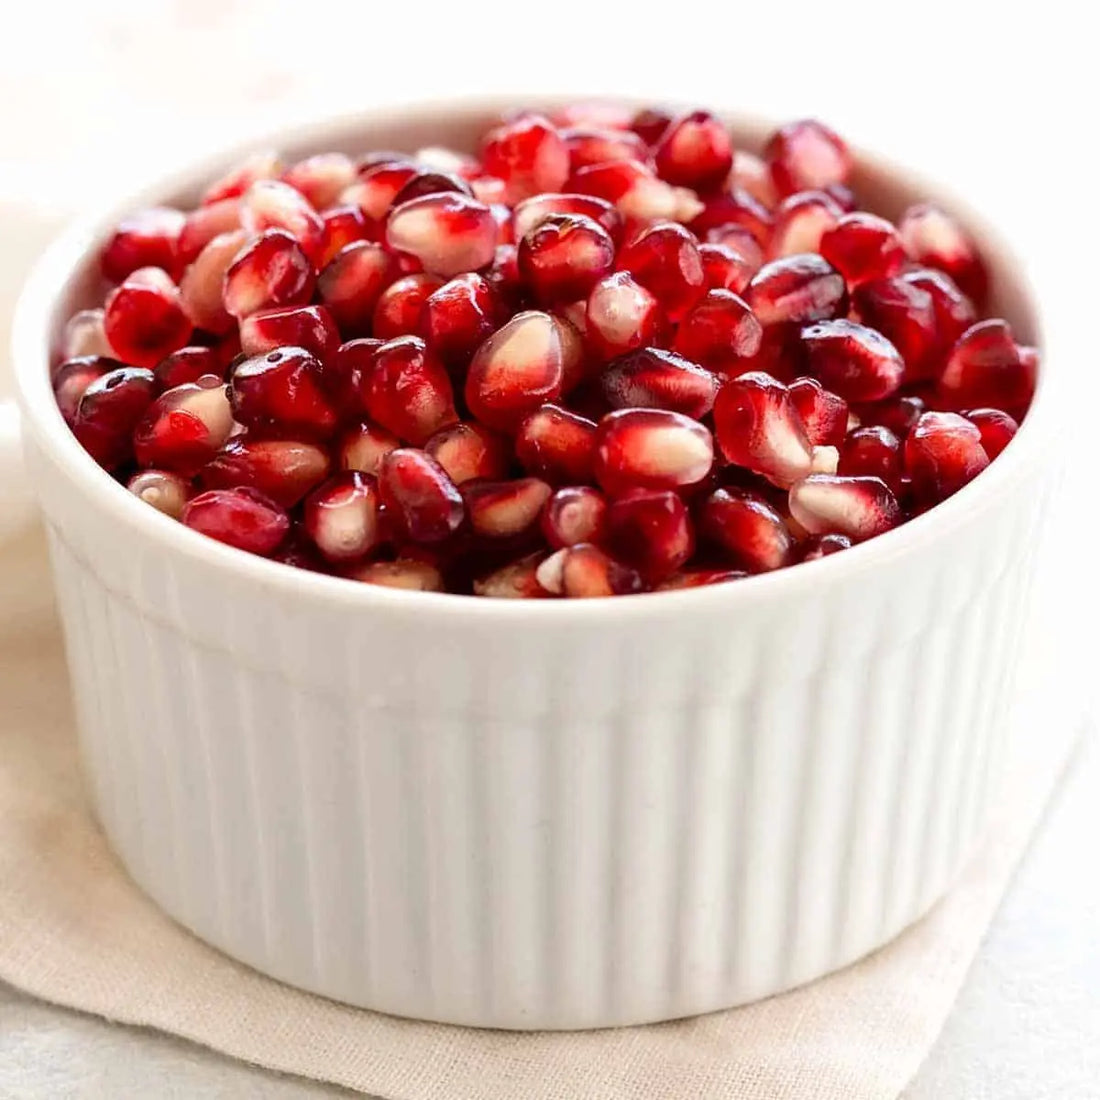 Anardana: The Unsung Hero of Culinary and Health benefits from Pomegranate Seeds